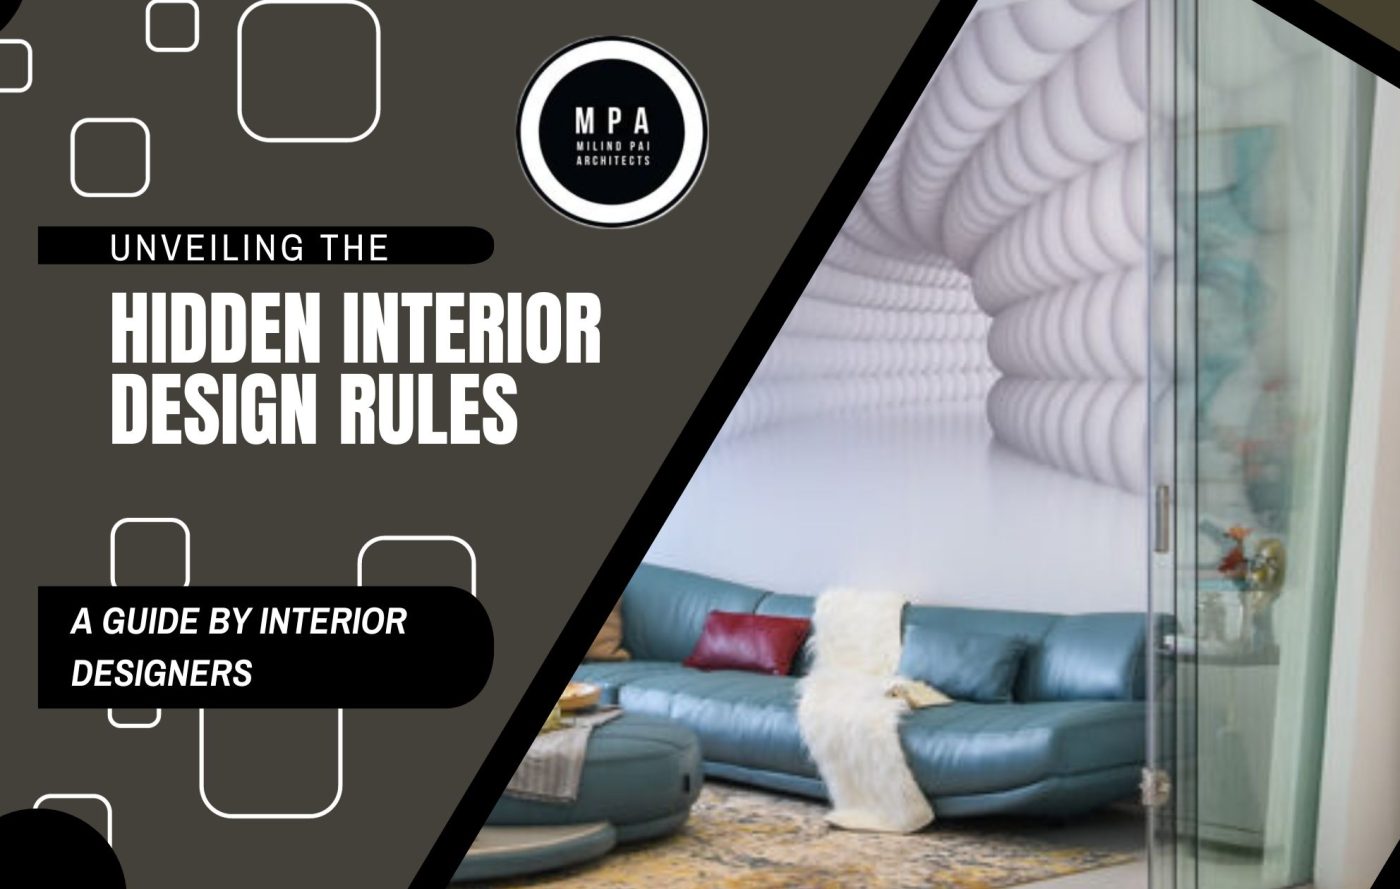 Unveiling the Hidden Interior Design Rules A Guide by Interior Designers